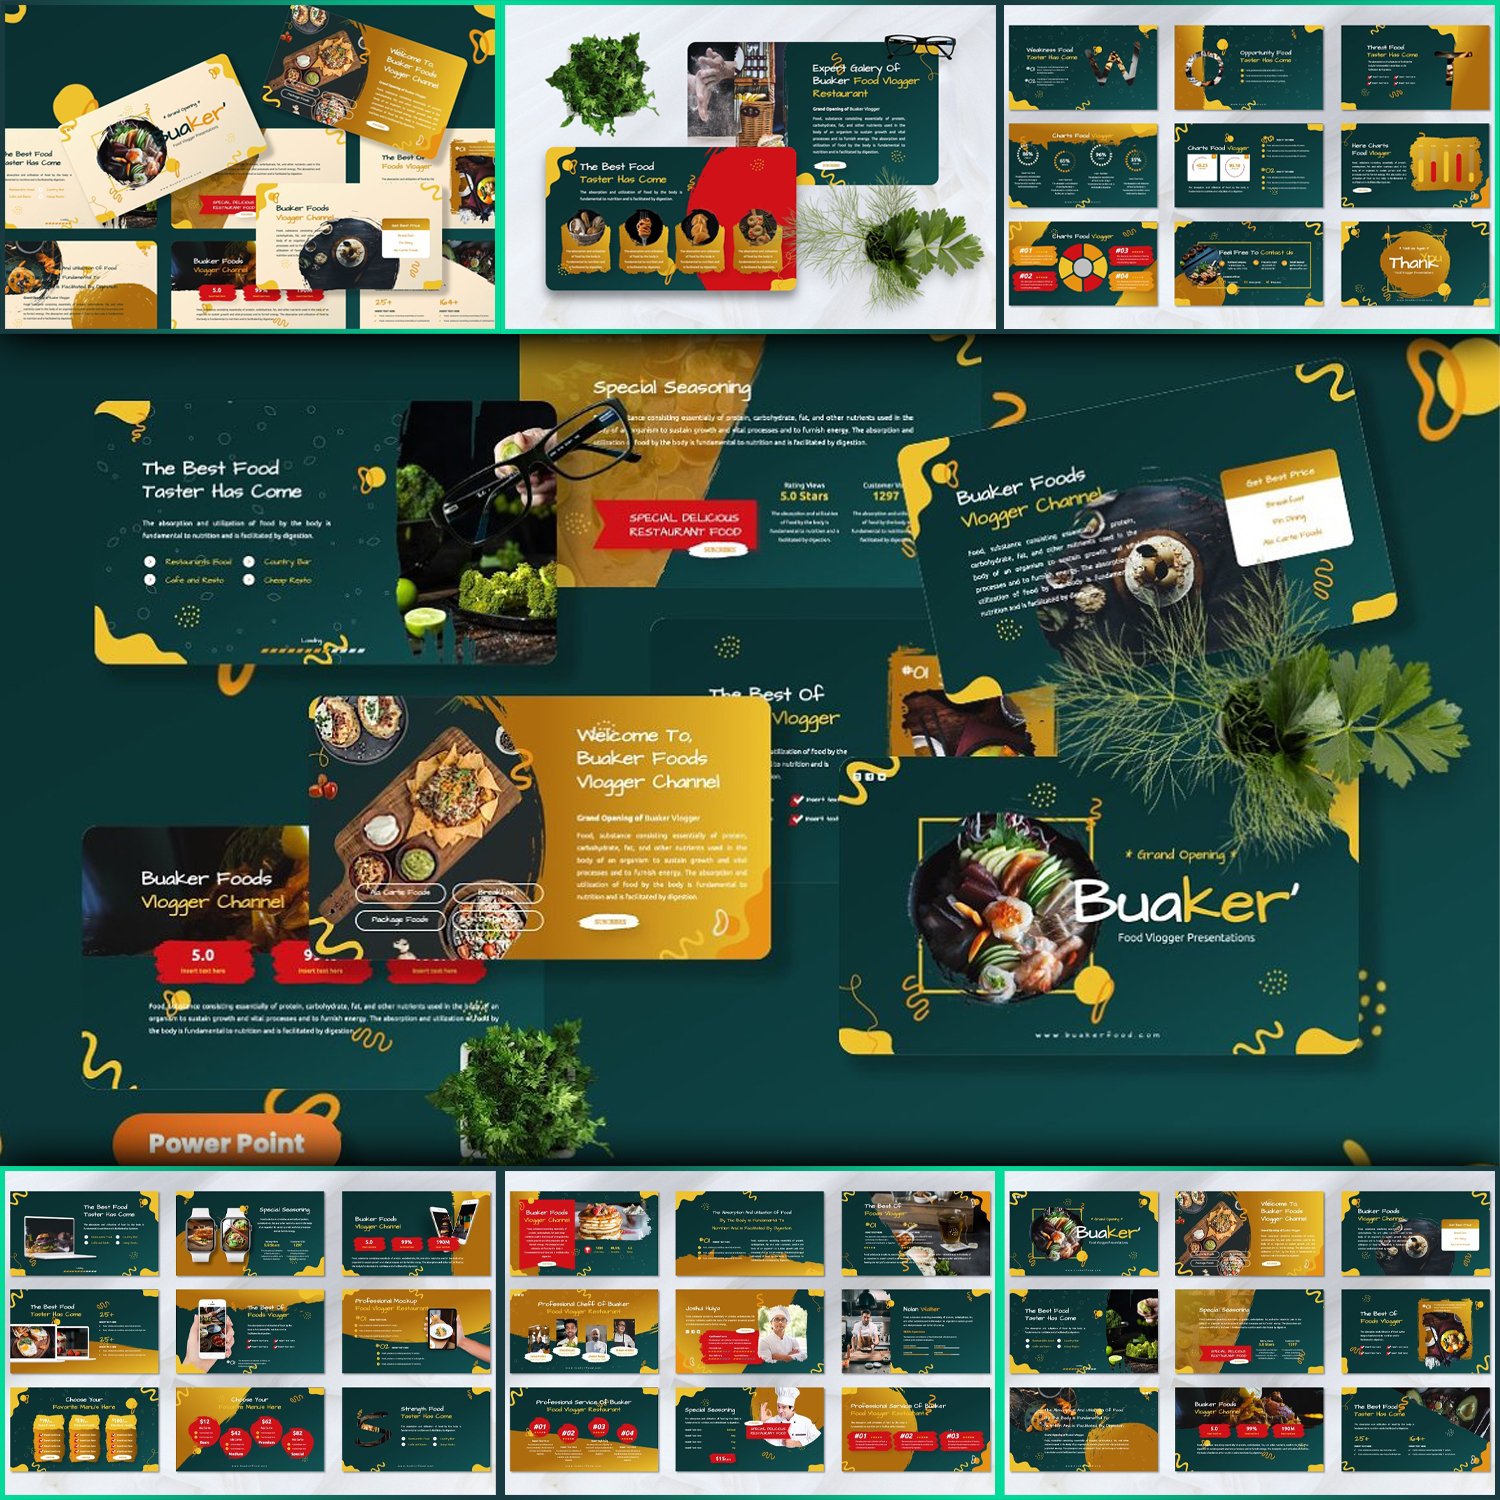 Images preview buaker food vlogger powerpoint.